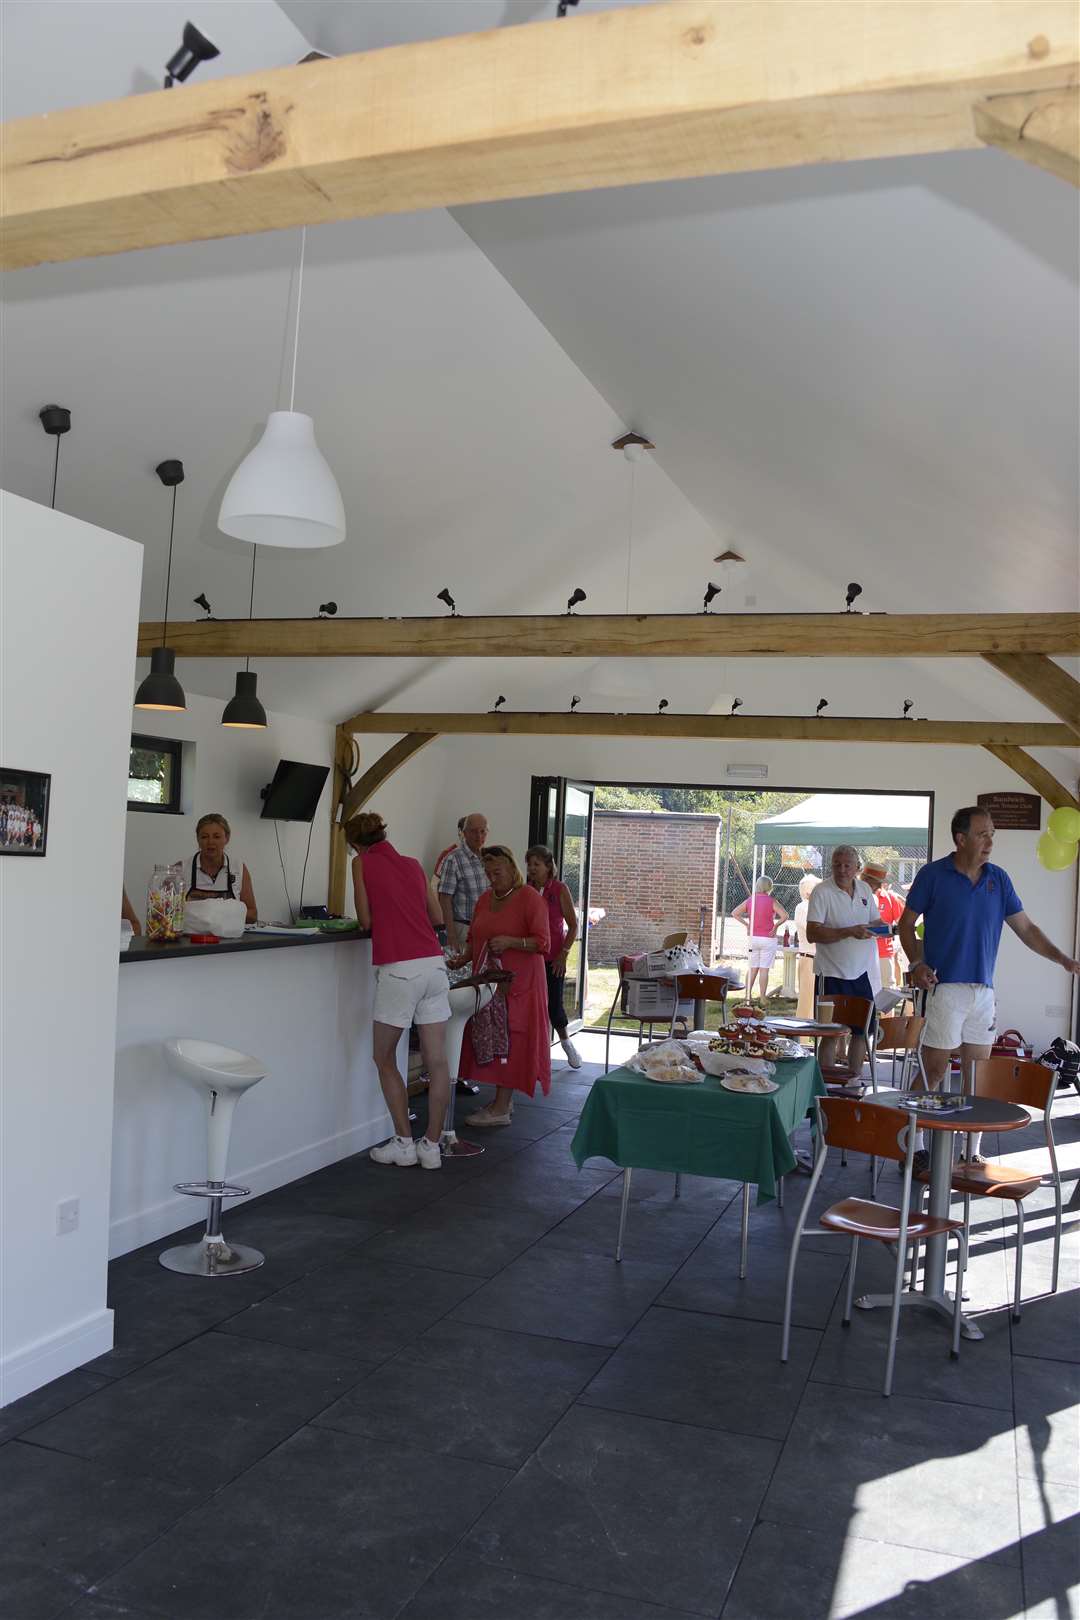 The inside of the new clubhouse in Sandwich